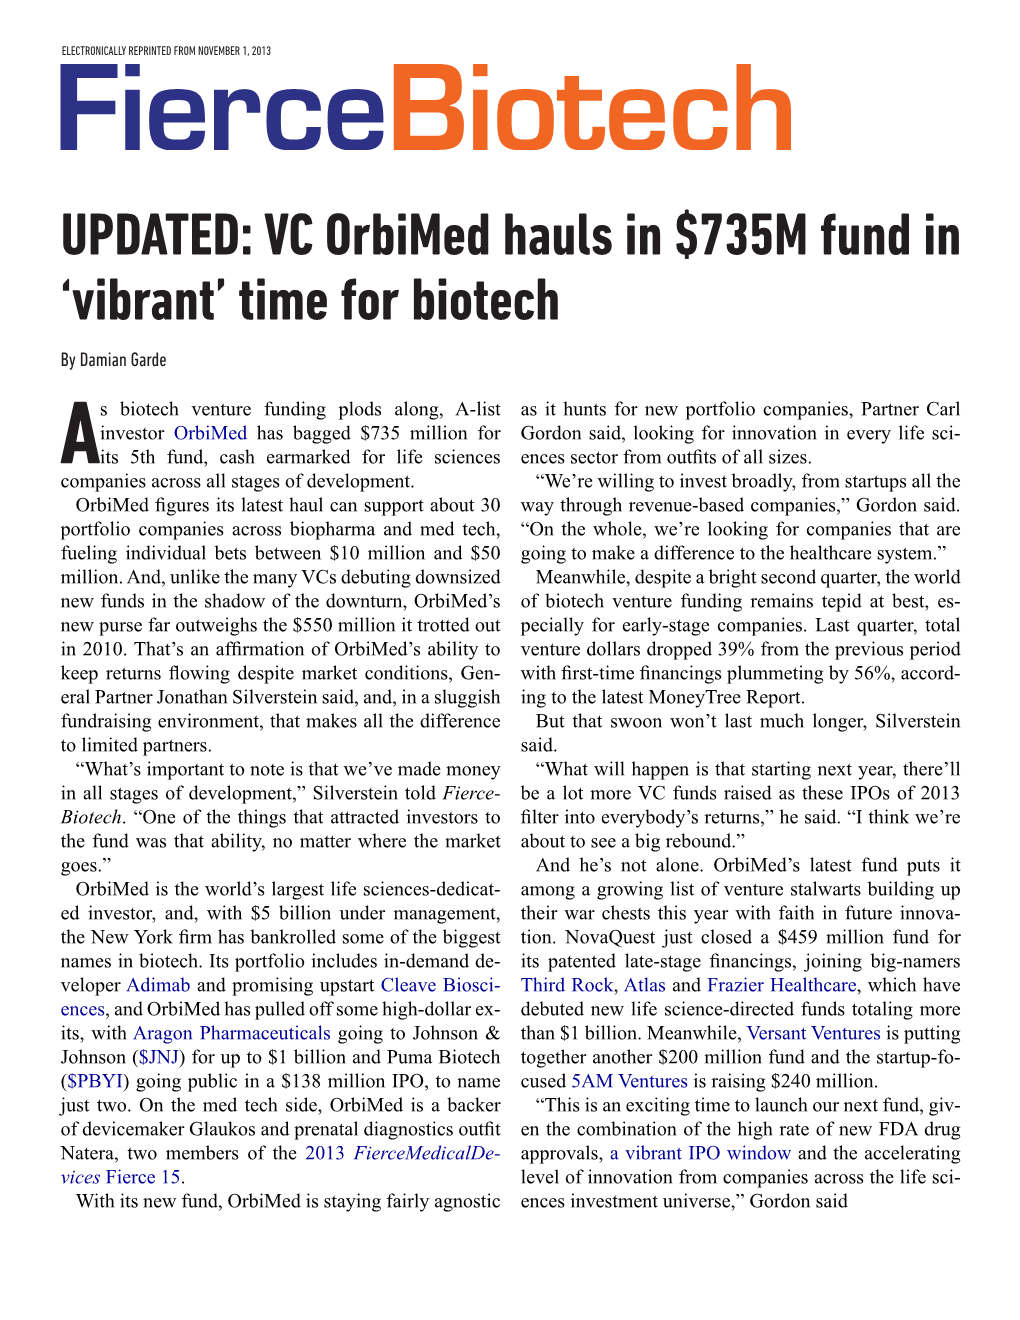 UPDATED: VC Orbimed Hauls in $735M Fund in 'Vibrant' Time for Biotech